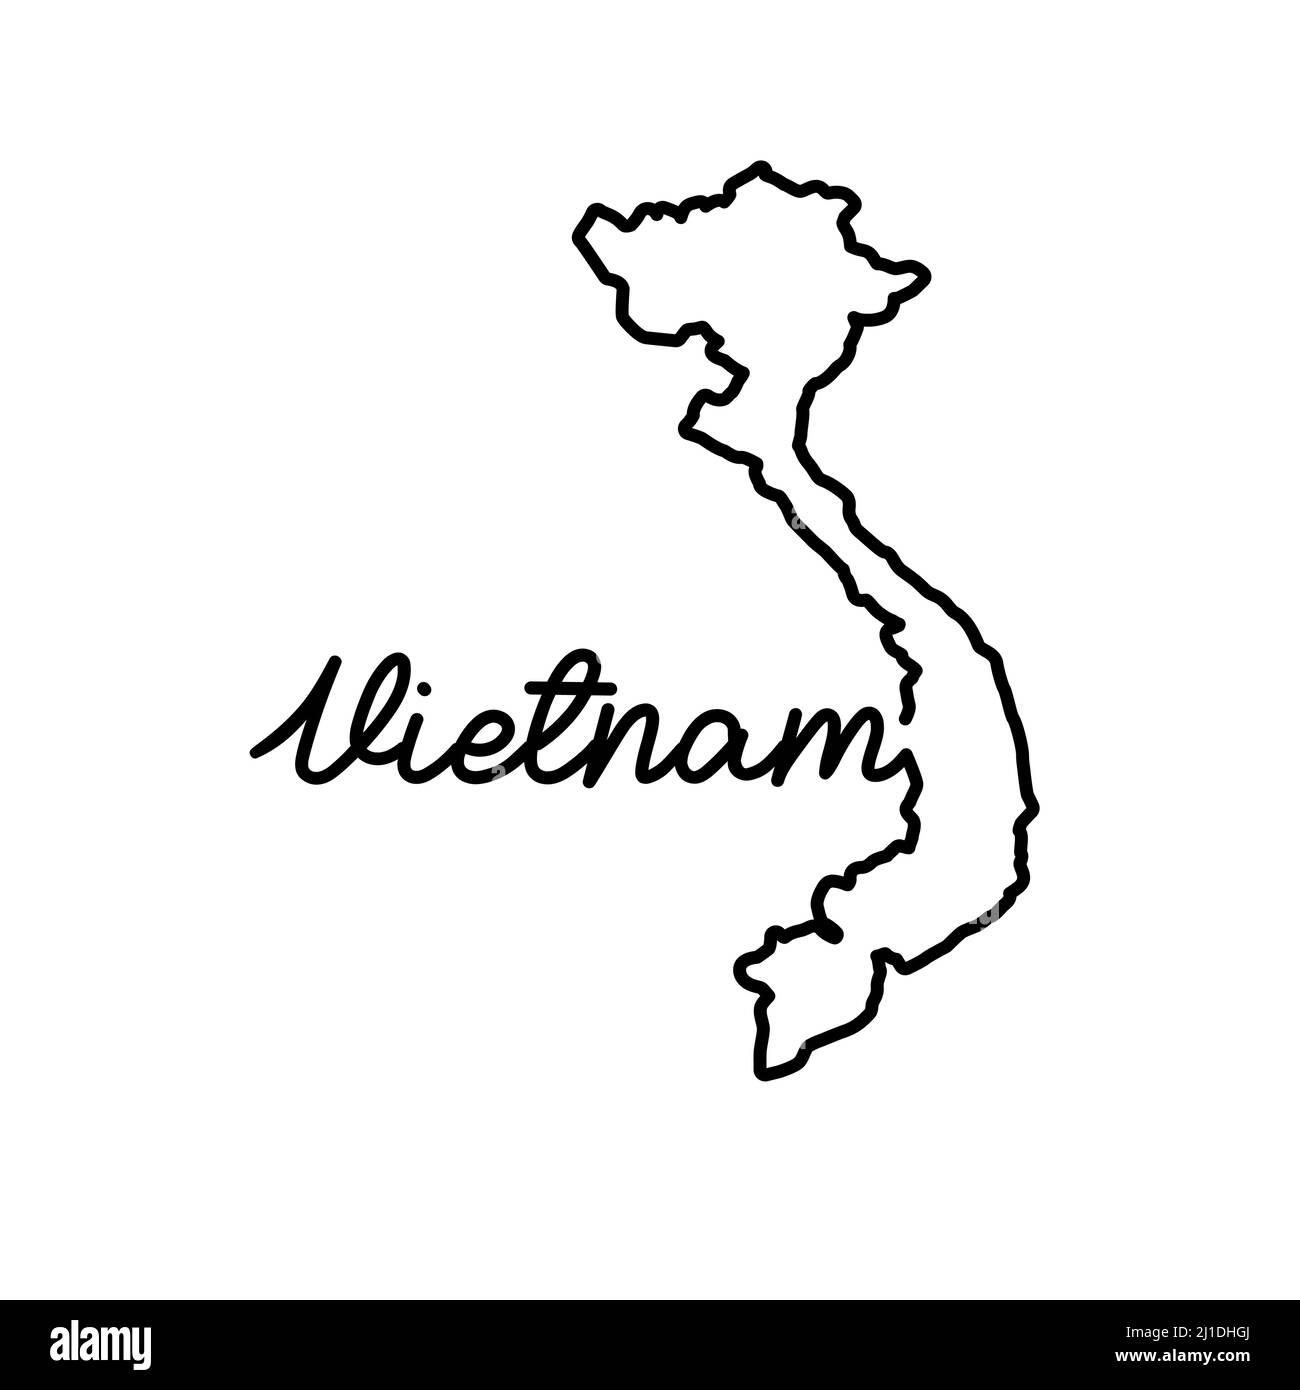 Vietnam outline map with the handwritten country name. Continuous line drawing of patriotic home sign. A love for a small homeland. T-shirt print idea Stock Vector